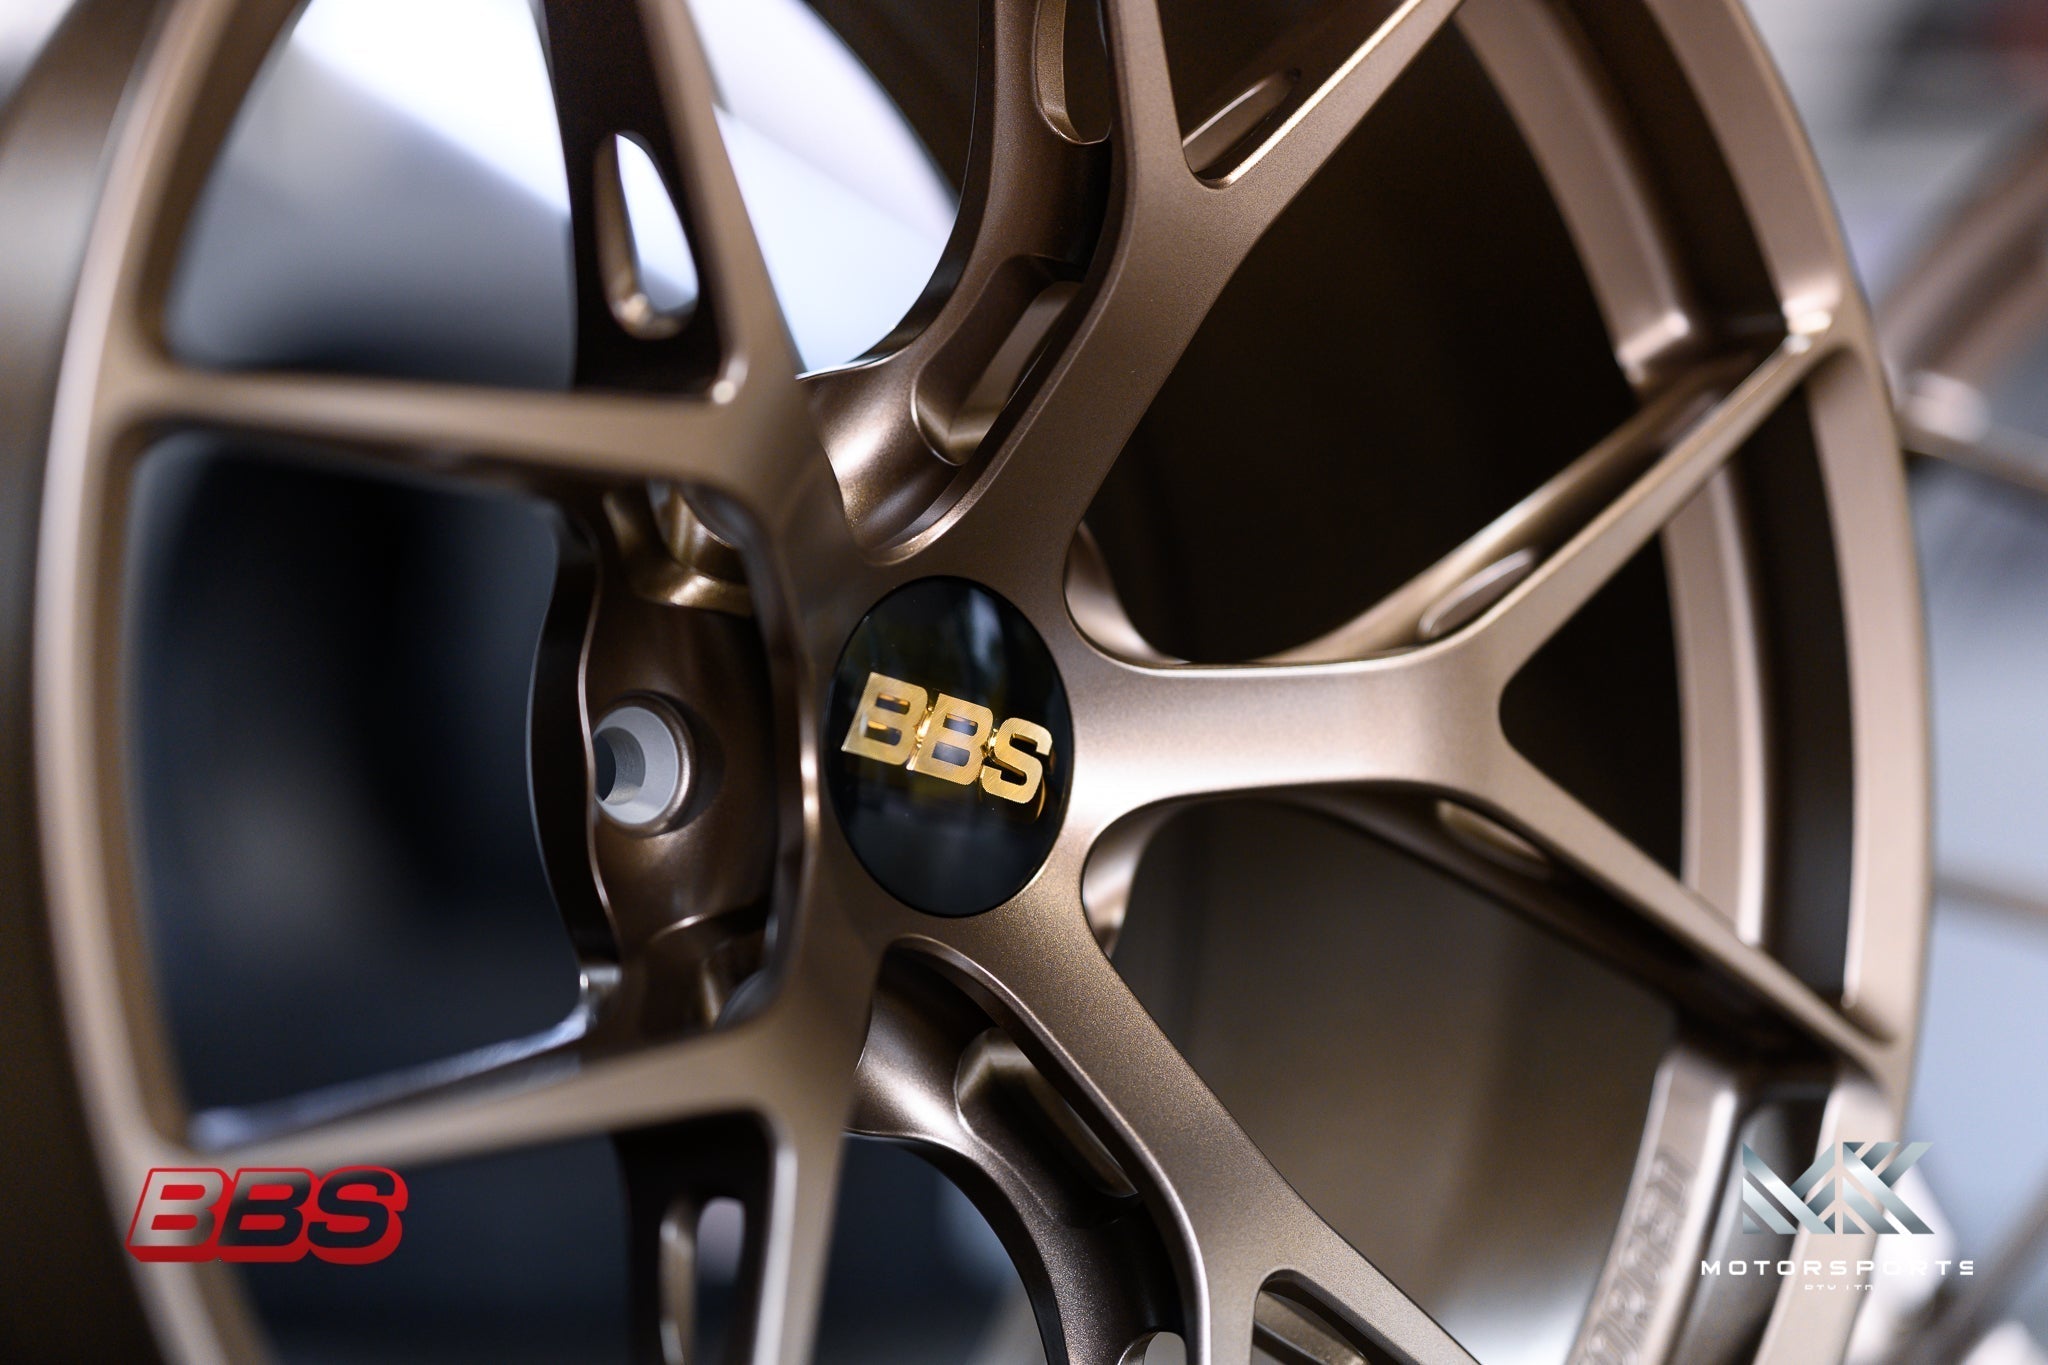 BBS FI-R - Premium Wheels from BBS Japan - From just $9890.00! Shop now at MK MOTORSPORTS